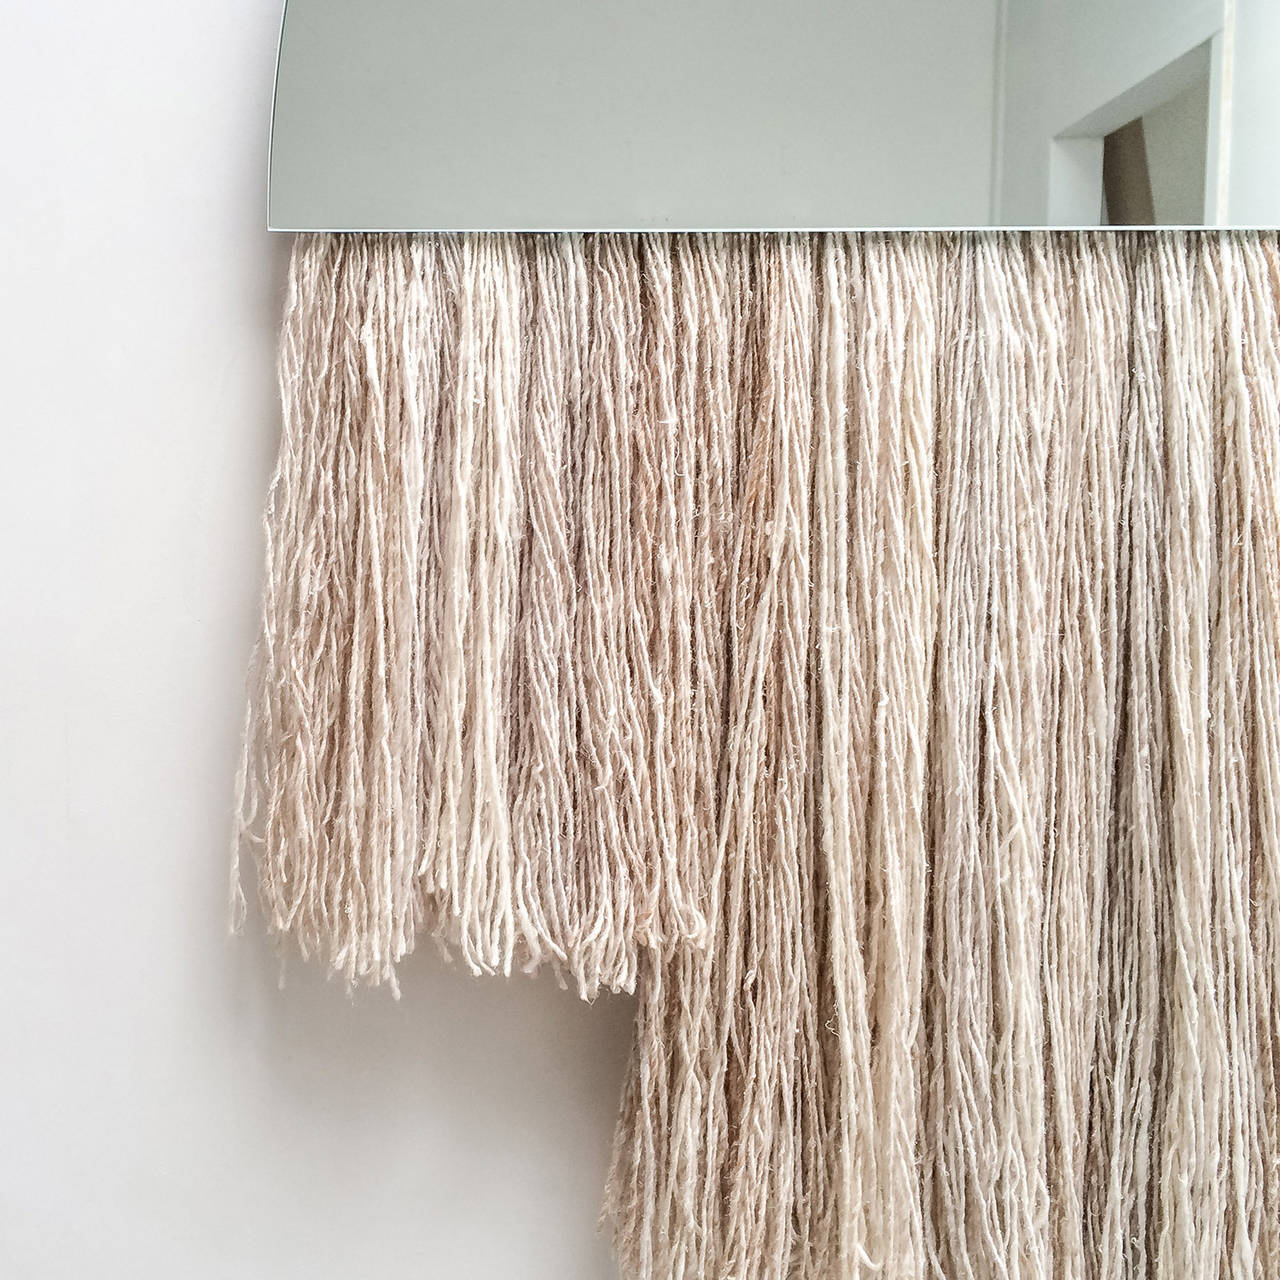 The Half Moon mirror by Ben and Aja Blanc combines the functionality of a large sized mirror with the depth and textural interest of sculptural fiber.

6-10 week production lead time.